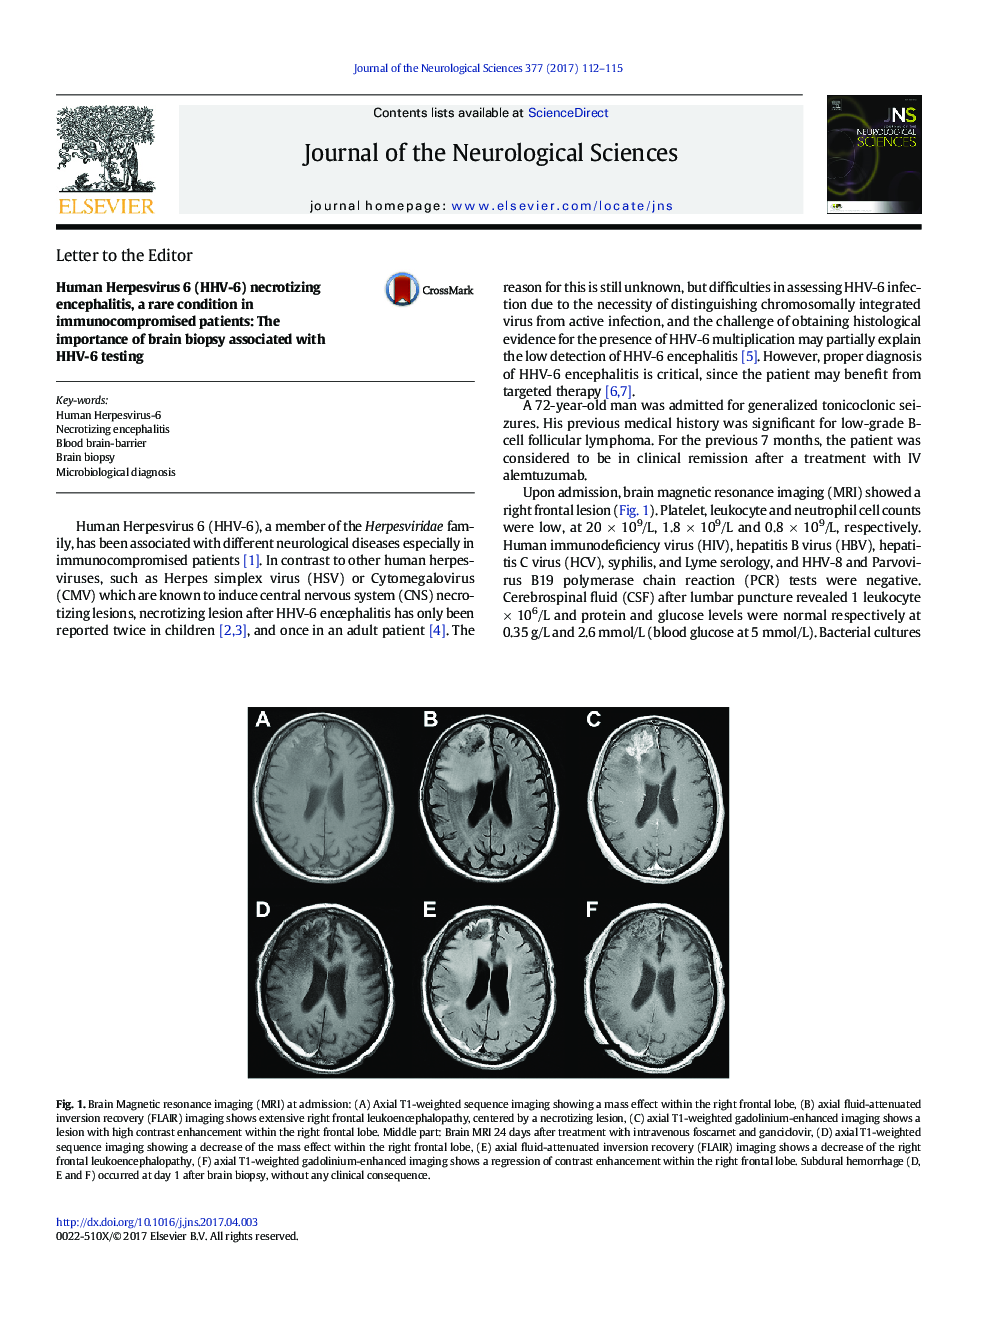 Human Herpesvirus 6 (HHV-6) necrotizing encephalitis, a rare condition in immunocompromised patients: The importance of brain biopsy associated with HHV-6 testing